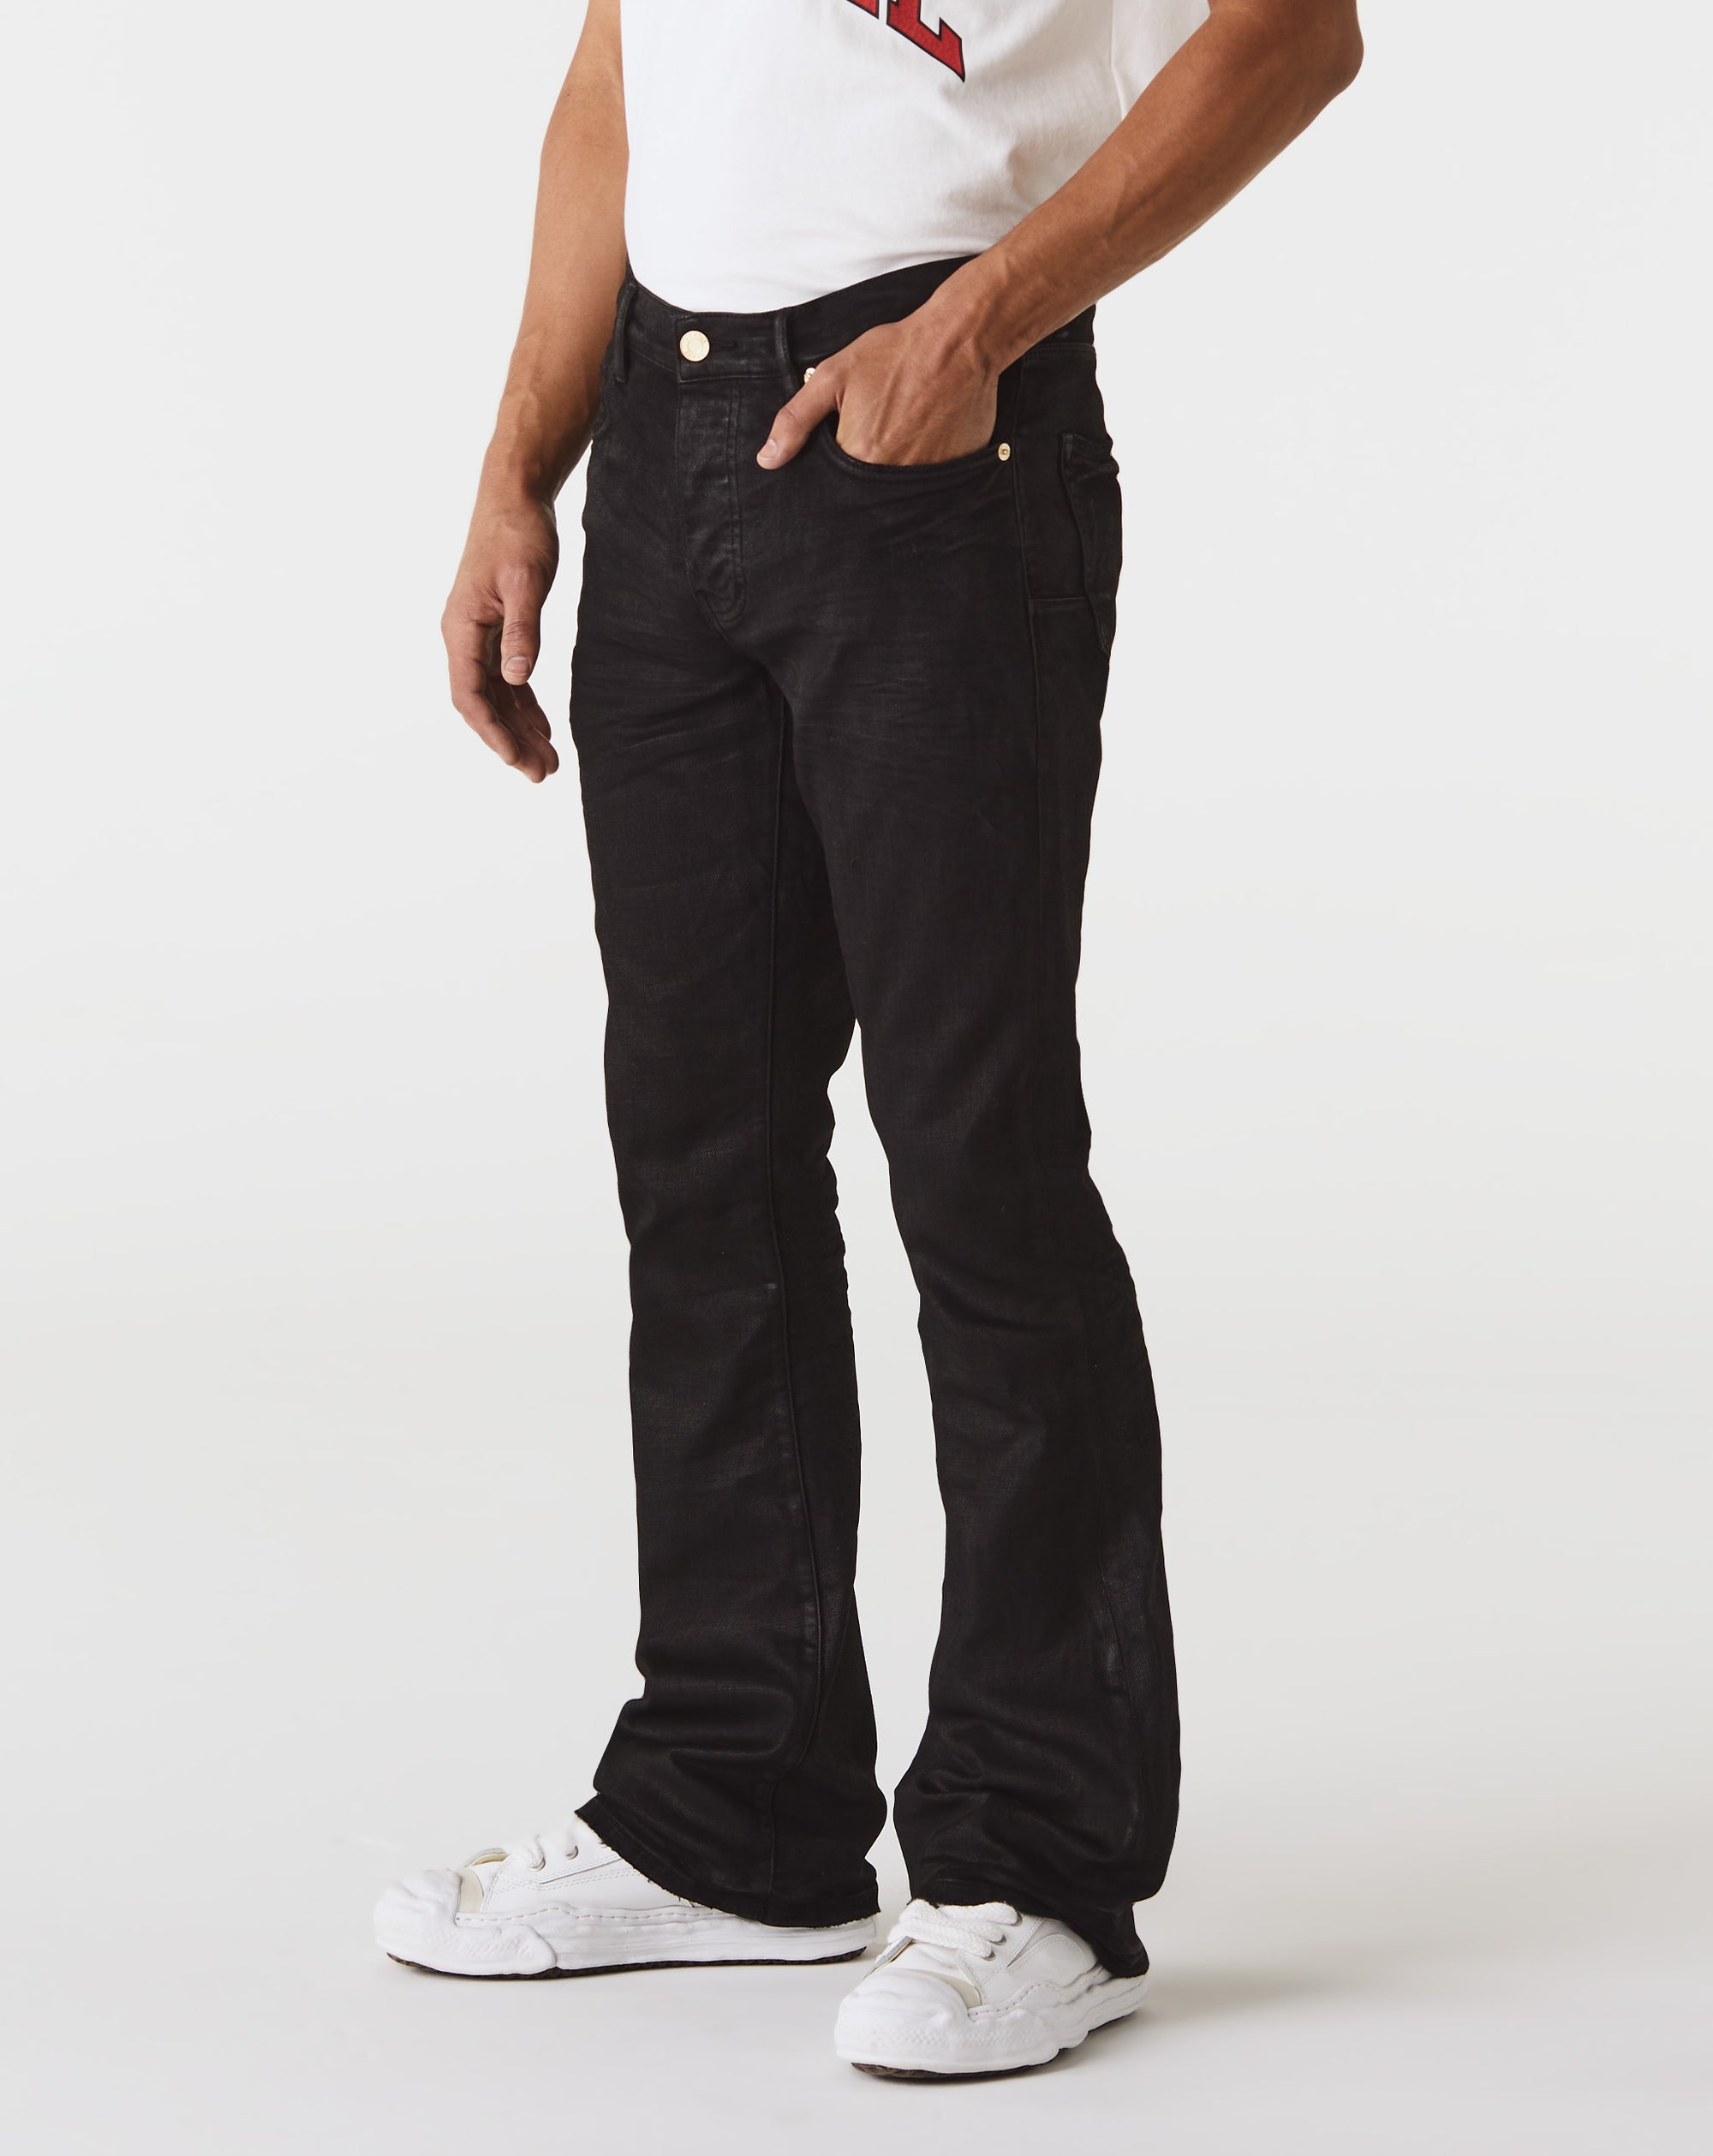 Purple Brand P004 Flare Jeans - Rule of Next Apparel